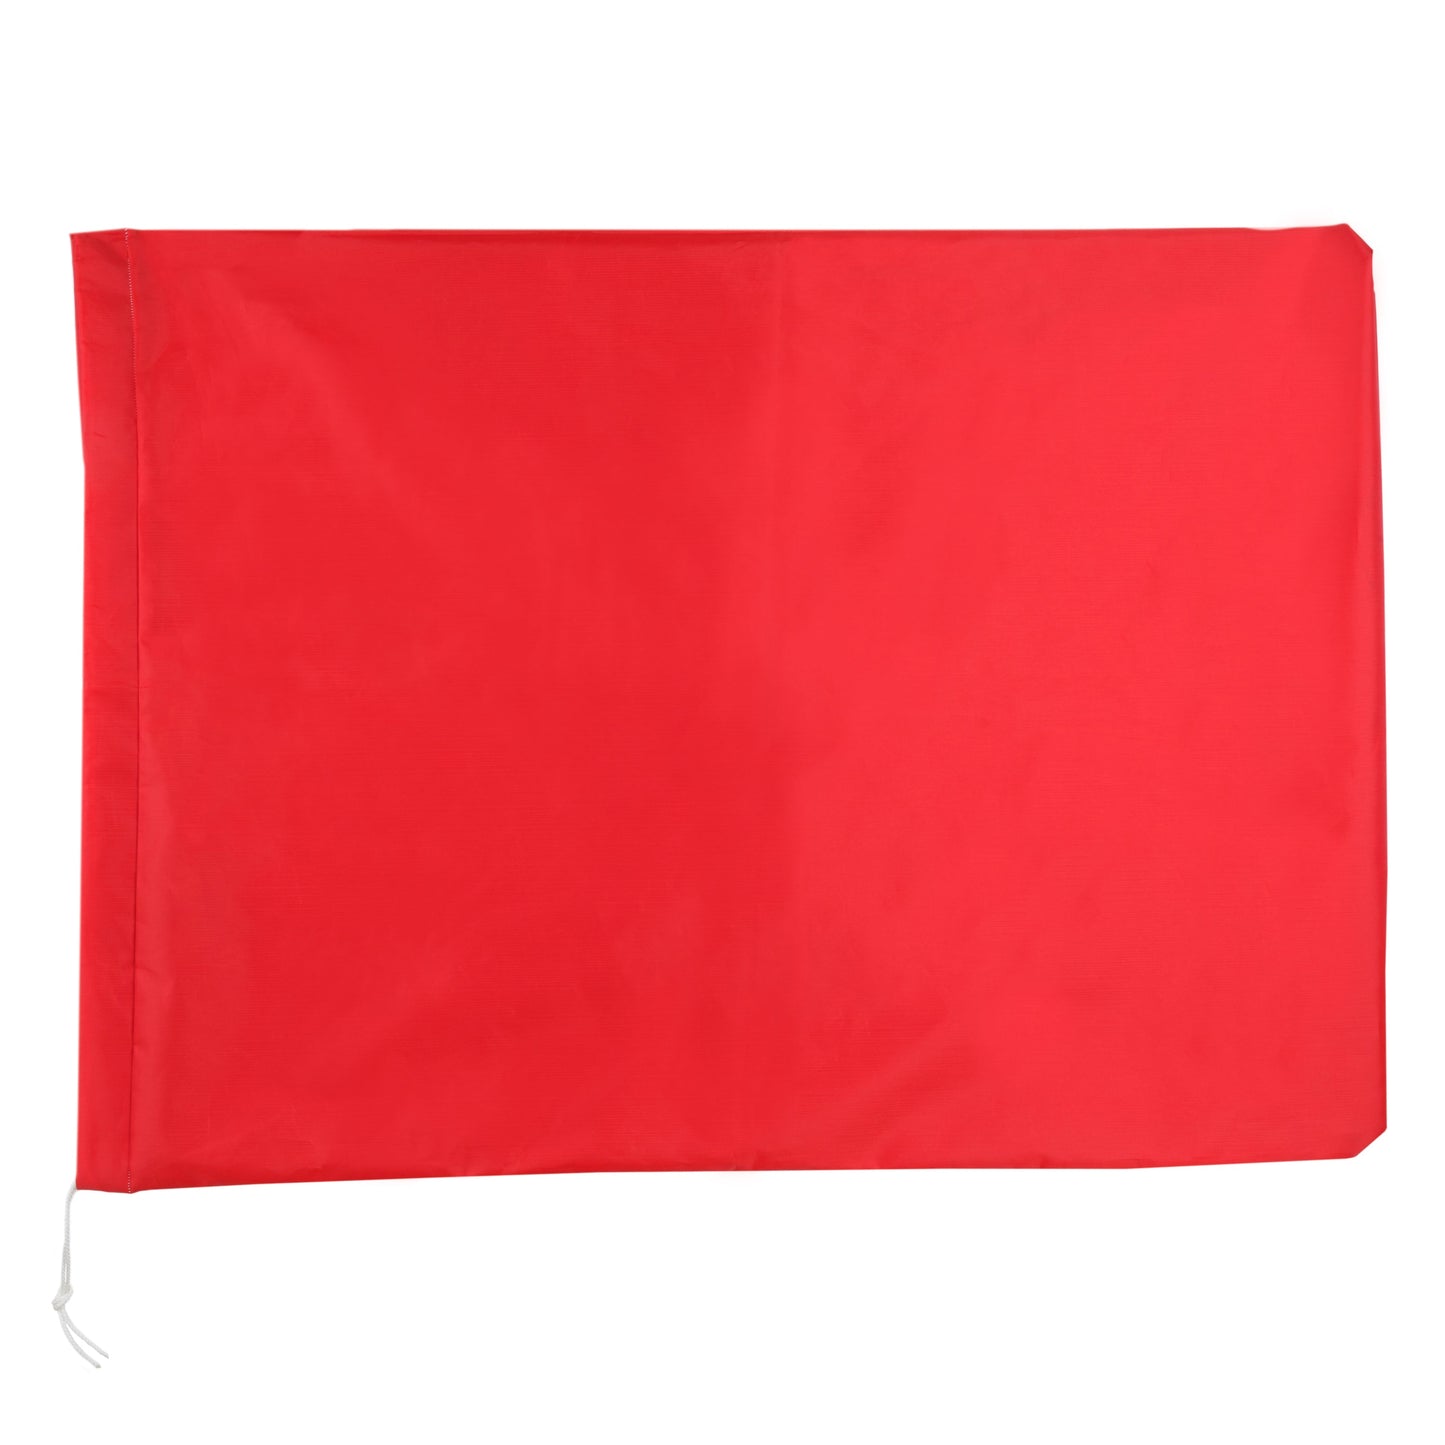 American Dawn | 30X40 Inch Red With Drawstring Closure Laundry Bag